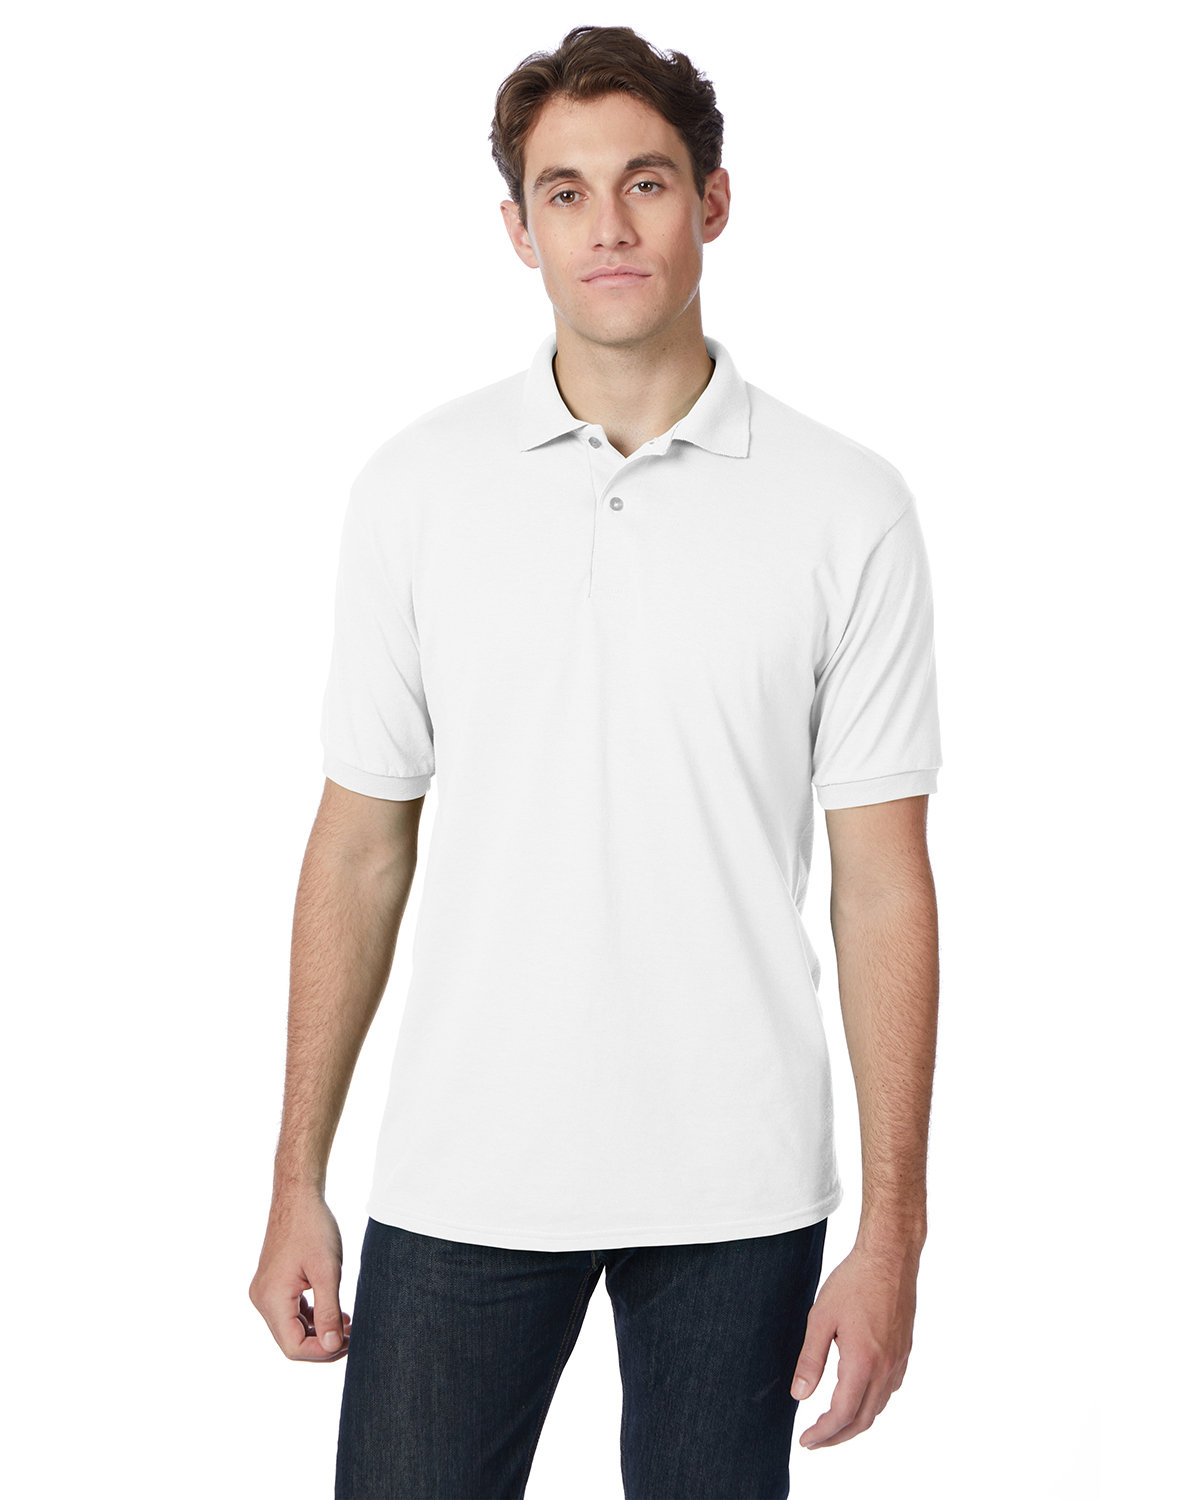 Hanes Adult 50/50 EcoSmart® Jersey Knit Polo WHITE 